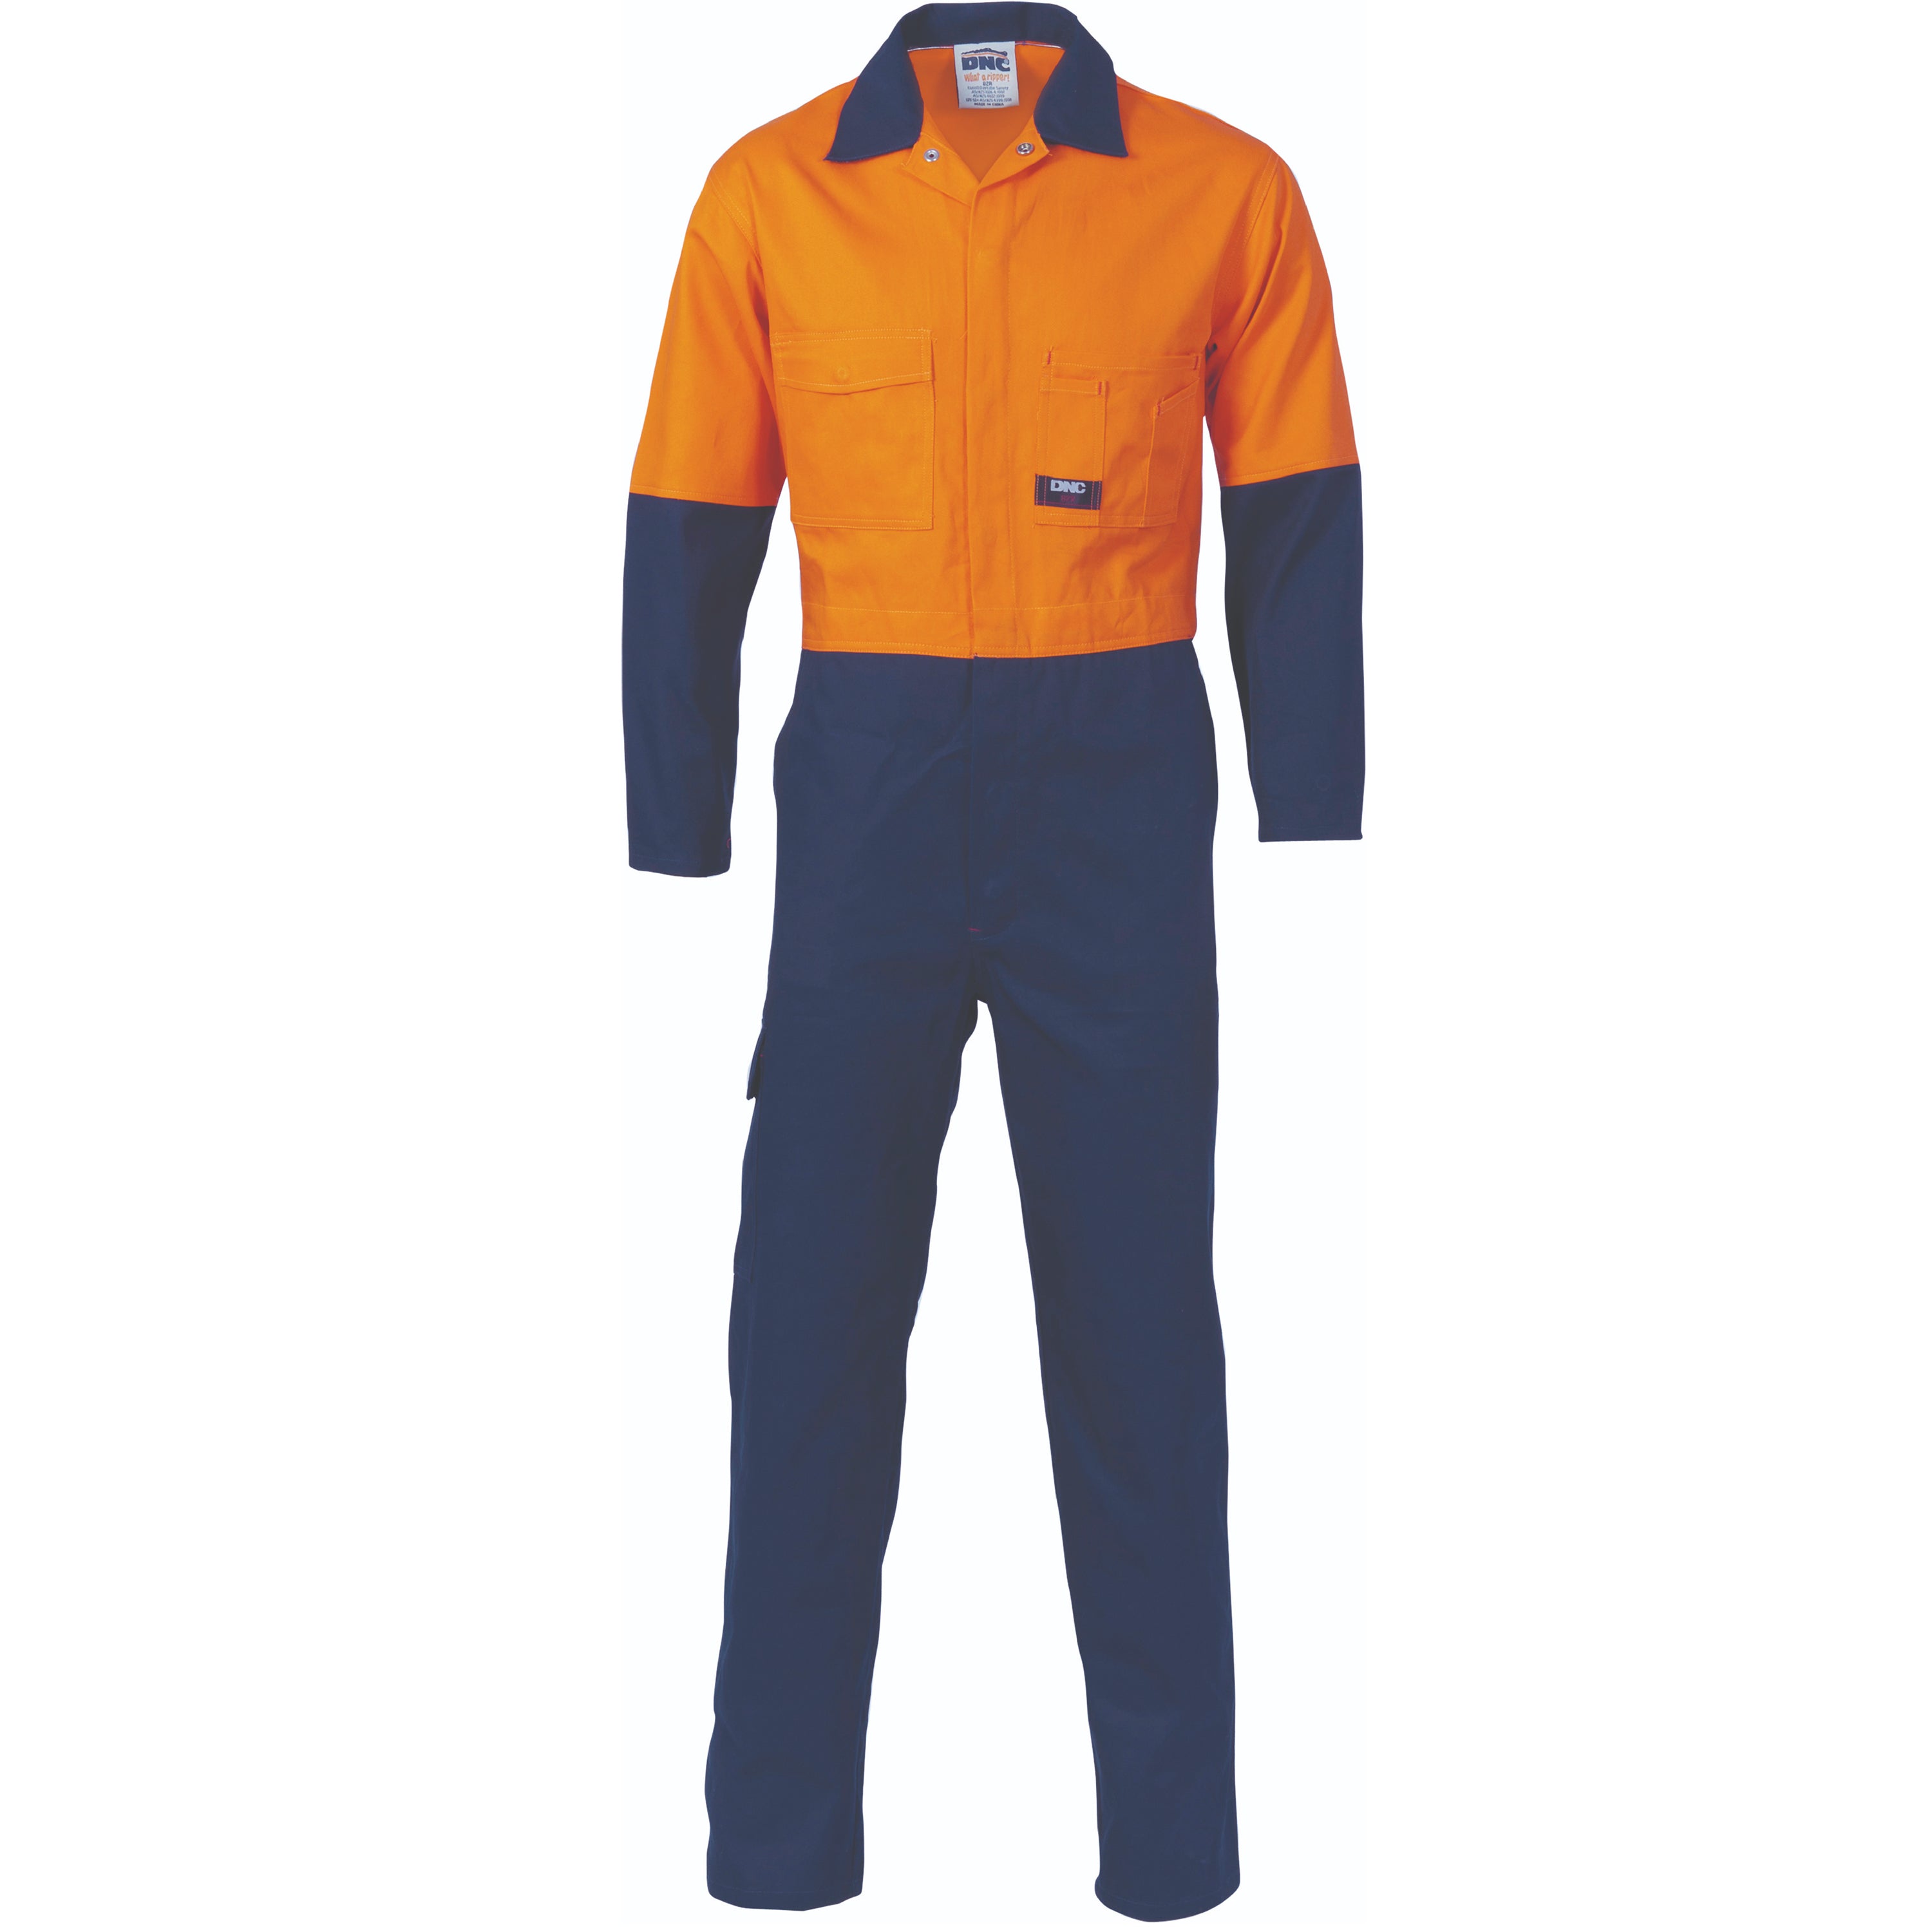 DNC HiVis Two Tone Cott on Coverall -(3851)